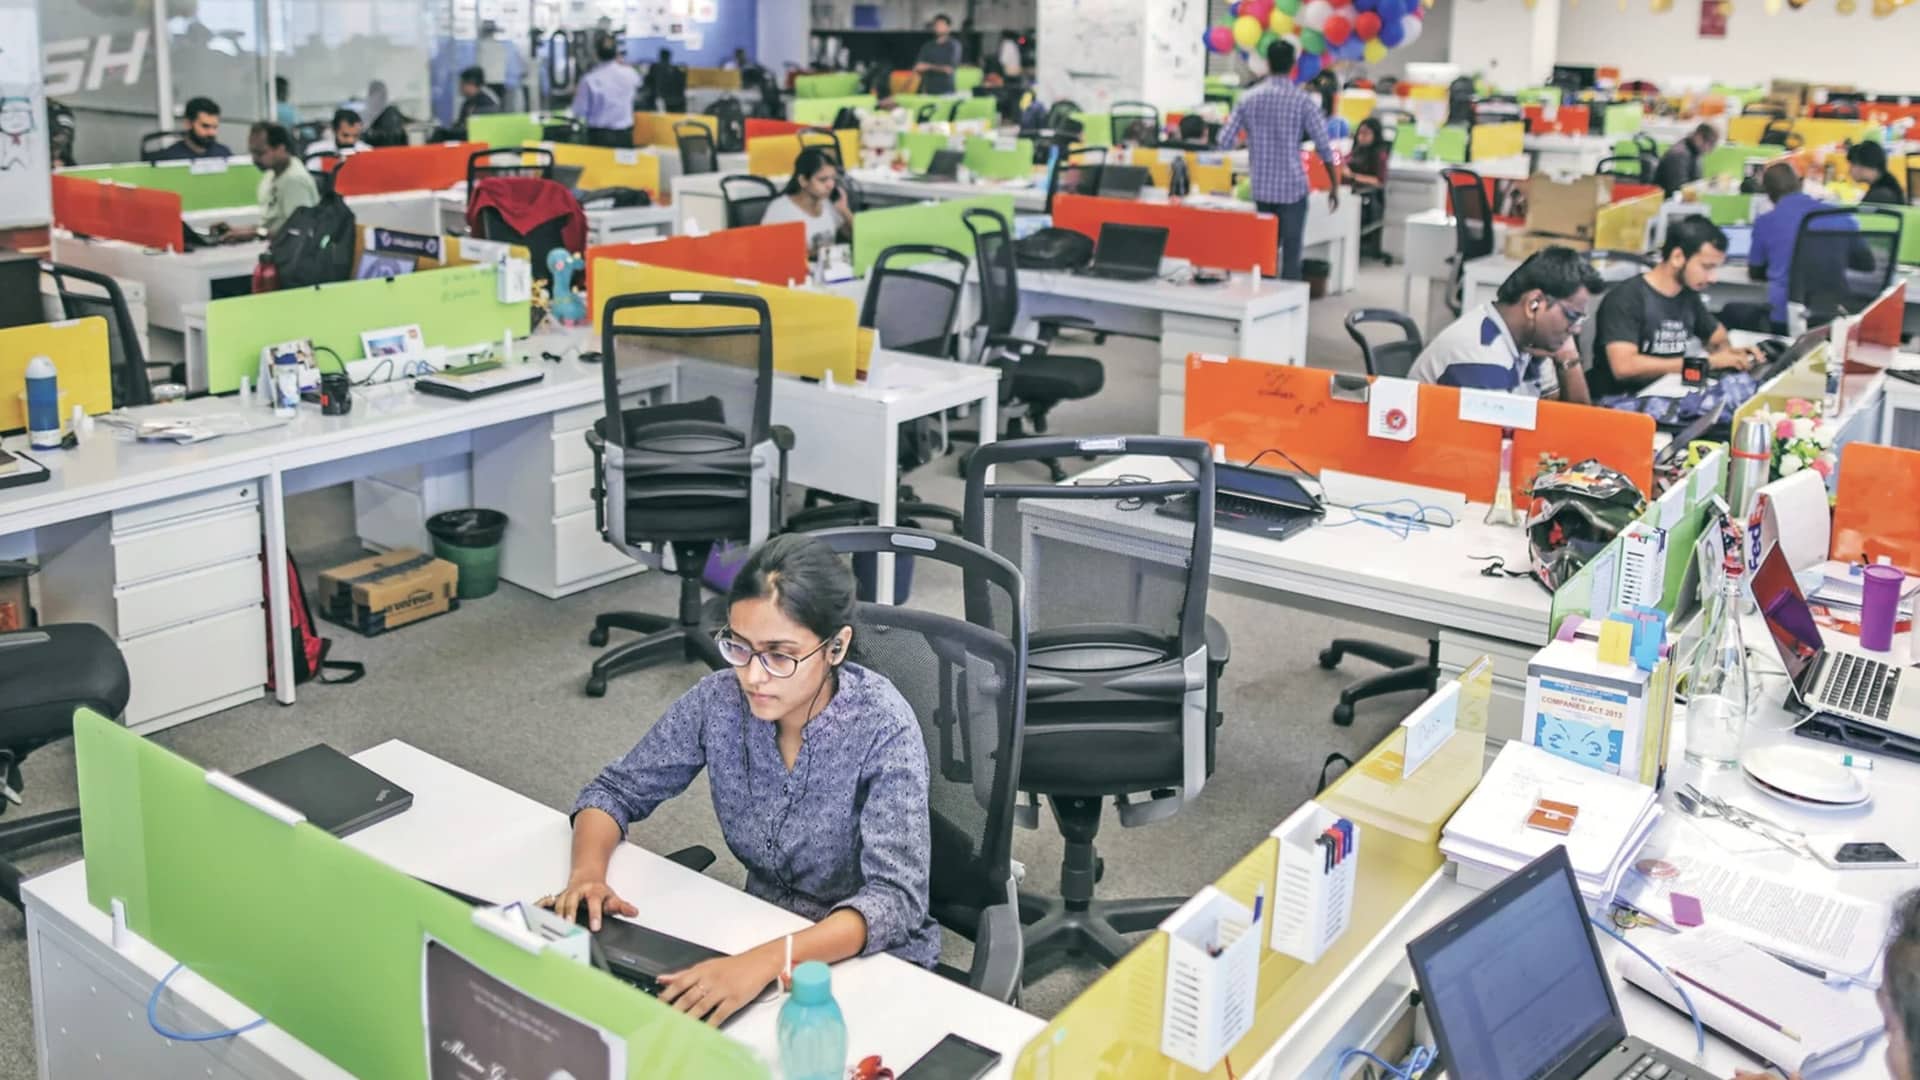 Most employees in India to continue learning through their career to stay relevant: Report